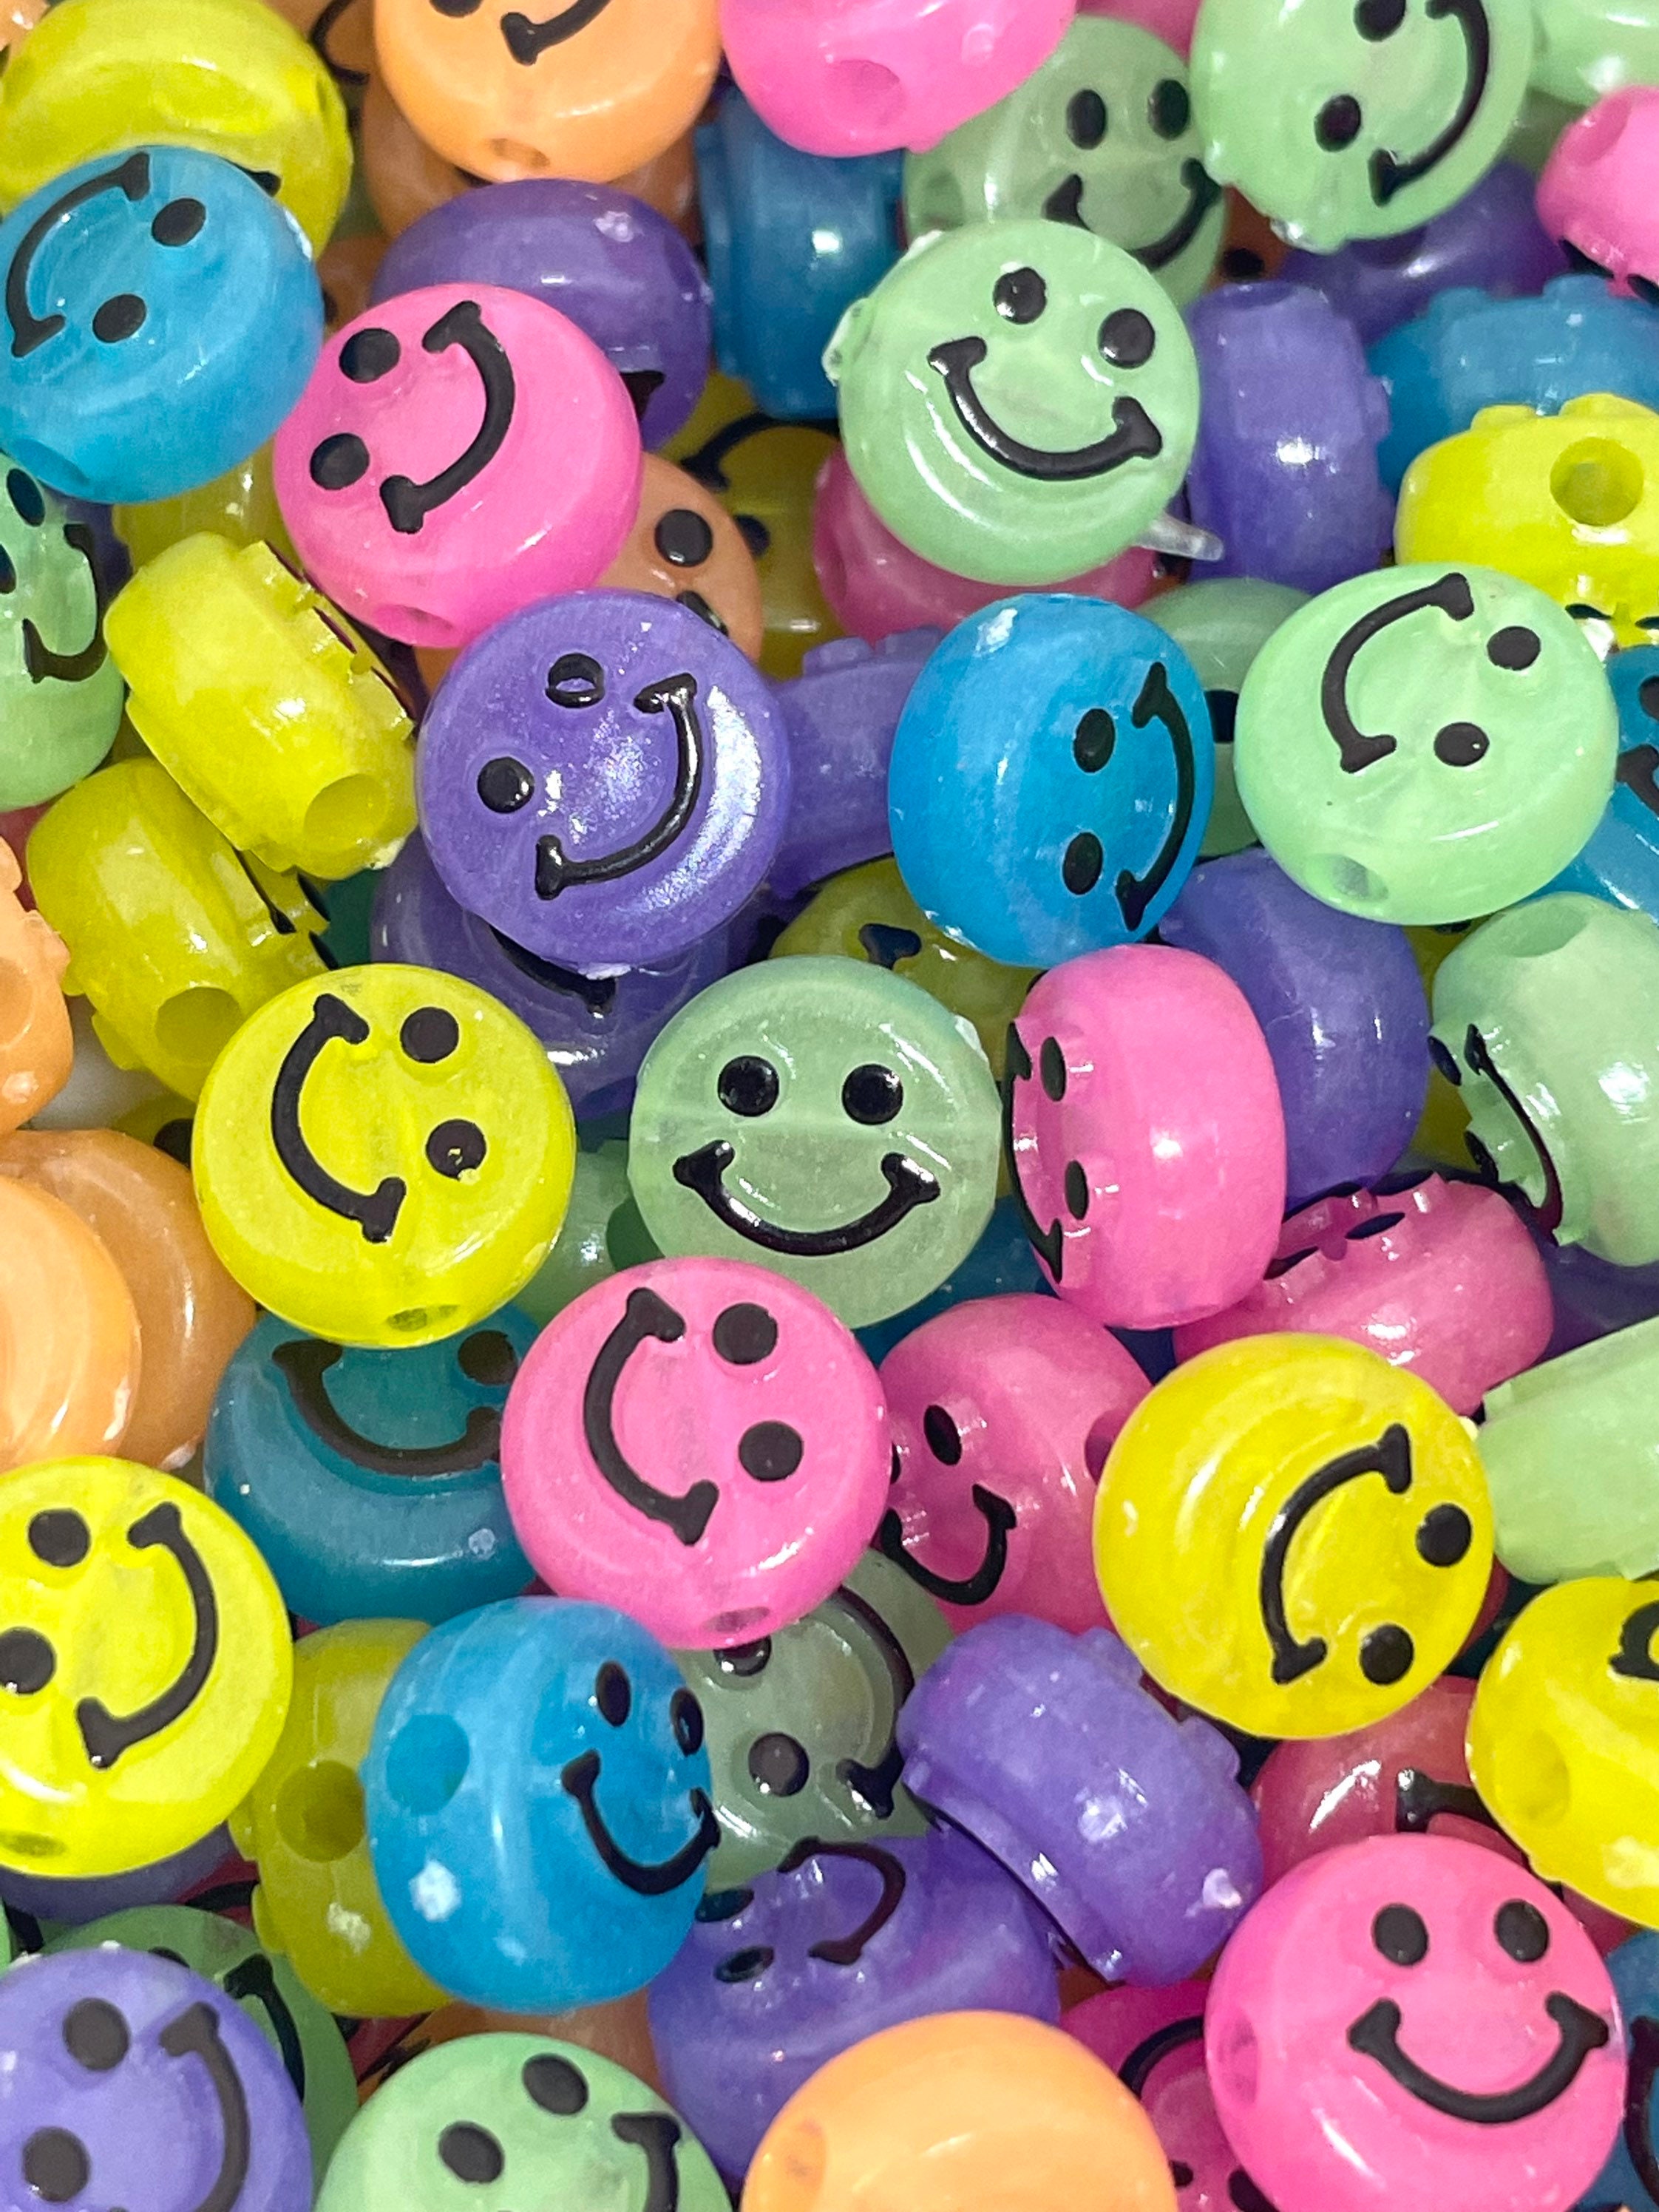 10mm smiley face beads, rainbow smiley beads, polymer clay beads, beads for  kids, craft beads, jewelry making beads